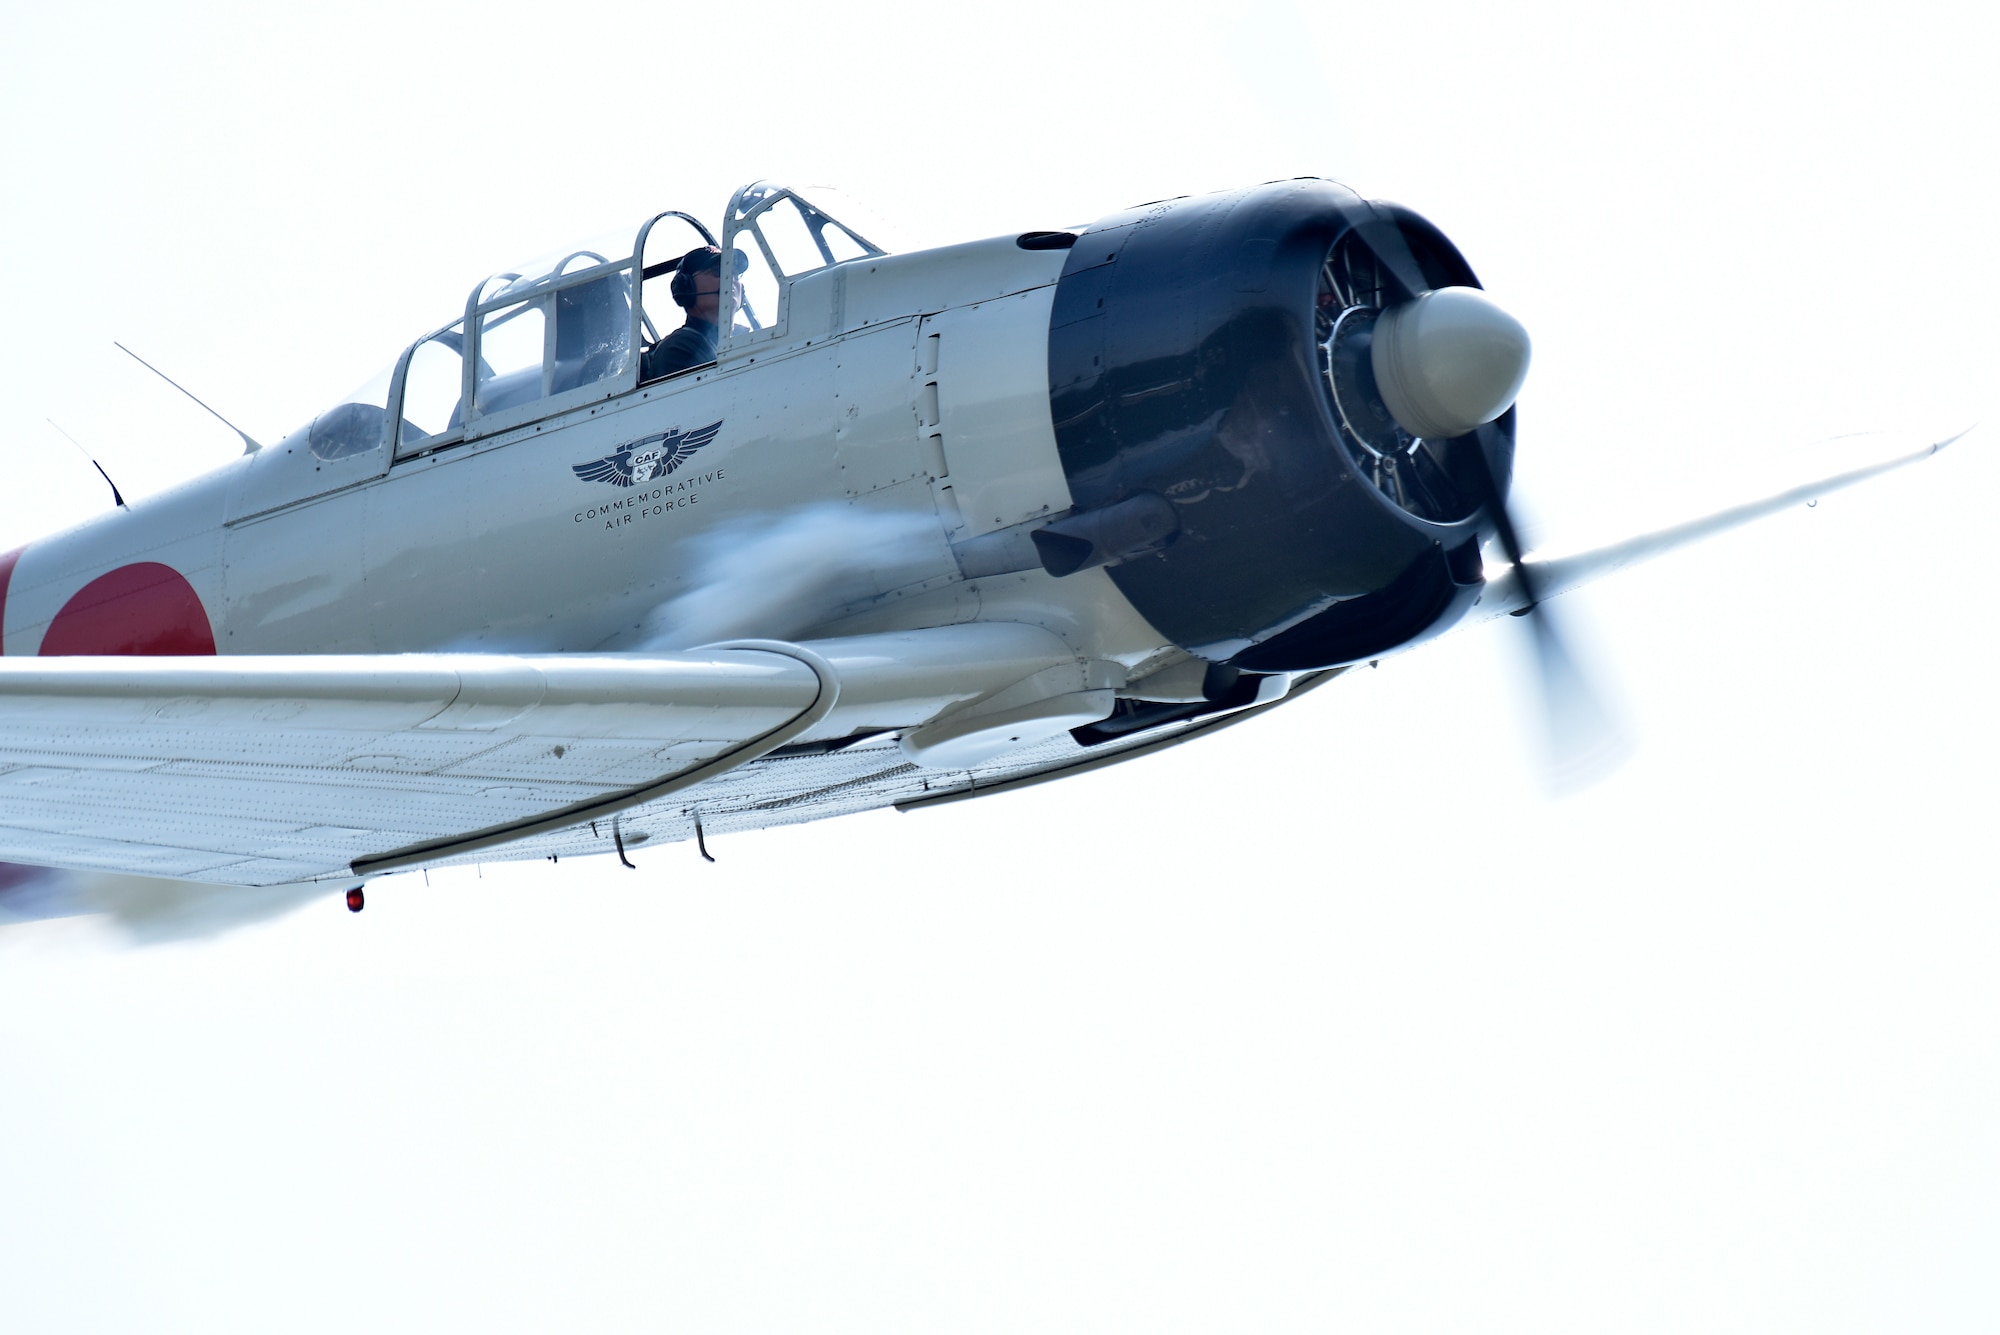 A Japanese Mitsubishi A6M Zero aircraft performs as part of the "Tora! Tora! Tora!" performance during the Wings Over Wayne Air Show, May 21, 2017, at Seymour Johnson Air Force Base, North Carolina. The air show is a way for Seymour Johnson AFB to thank local and regional communities for their ongoing support. (U.S. Air Force photo by Airman 1st Class Christopher Maldonado)